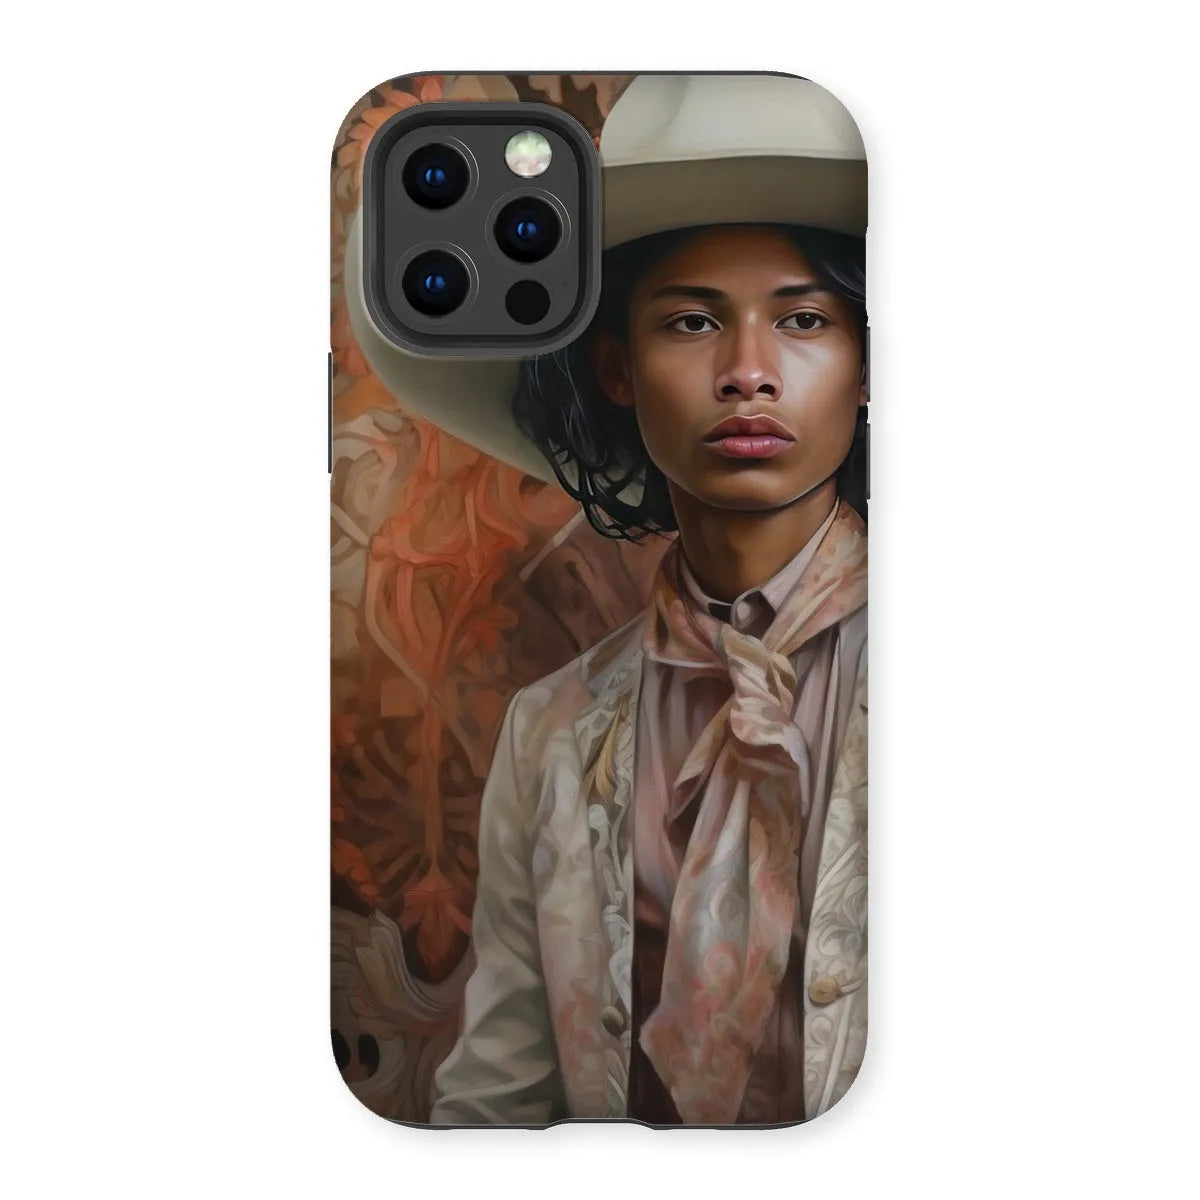 Arjuna The Gay Cowboy - Gay Aesthetic Art Phone Case - Iphone 12 Pro / Matte - Mobile Phone Cases - Aesthetic Art